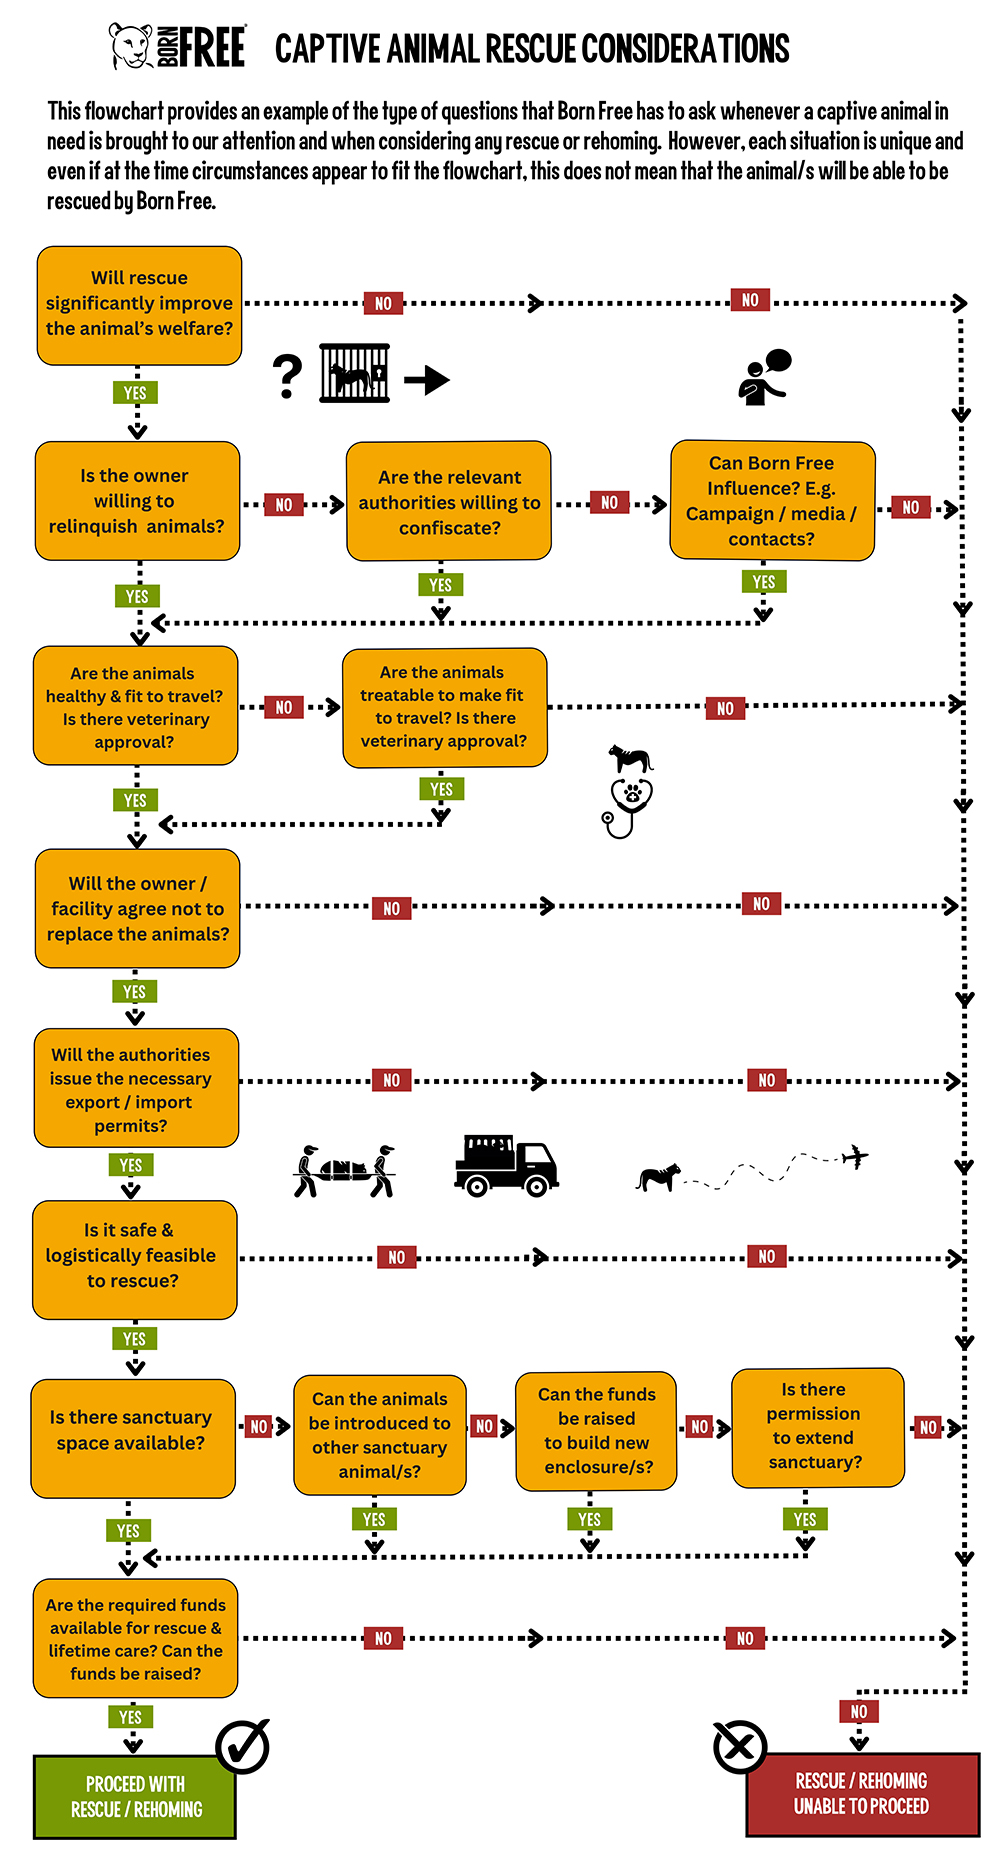 A graphic flowchart illustrating the animal rescue process